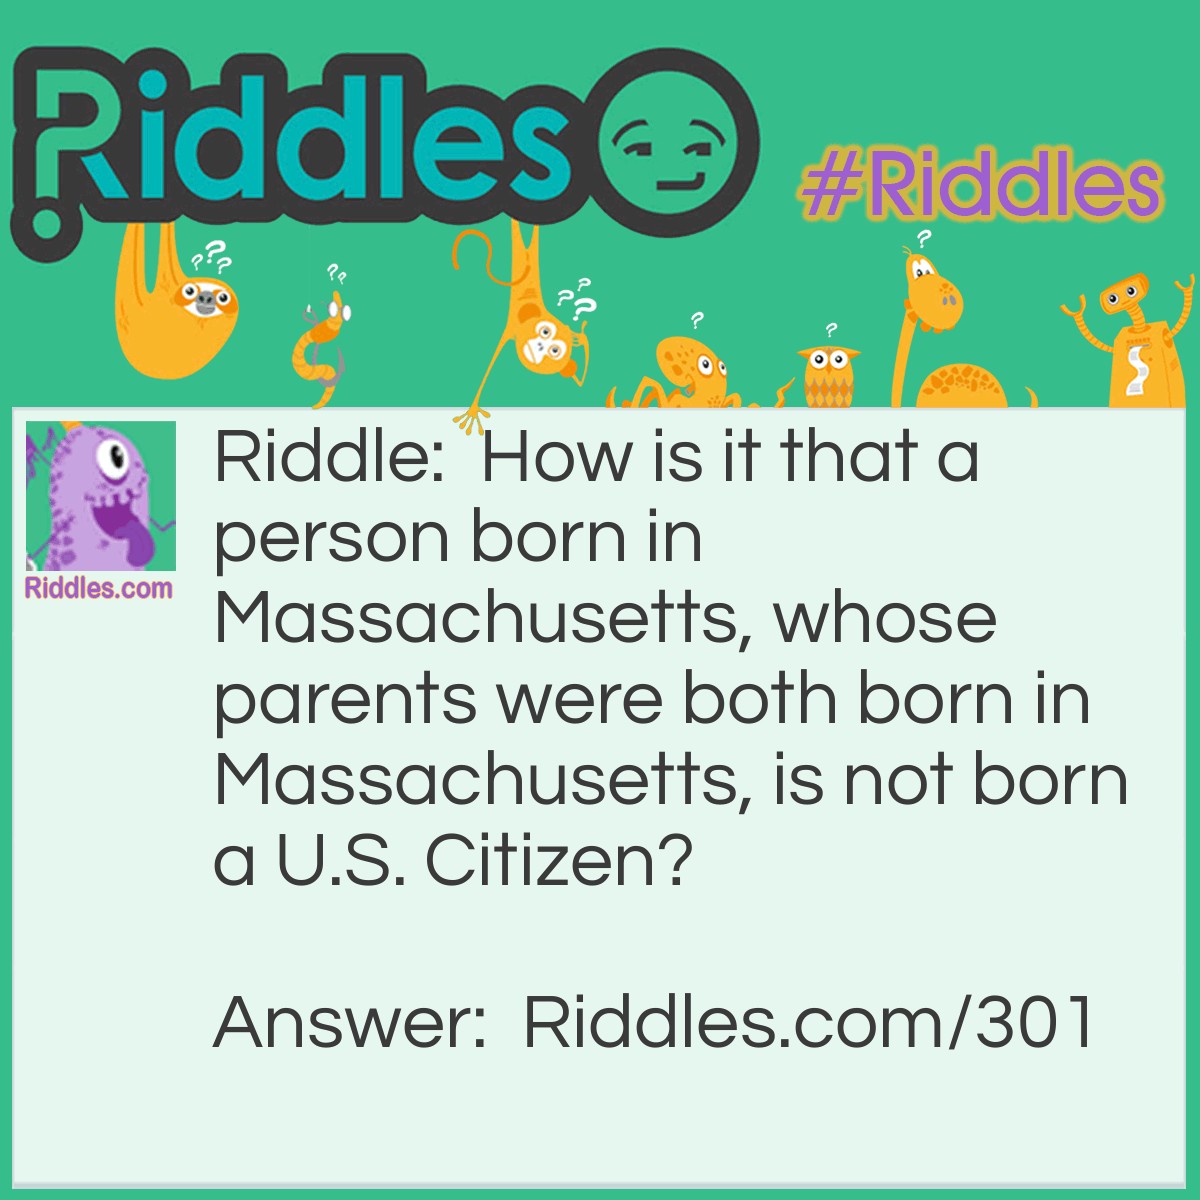 Riddle: How is it that a person born in Massachusetts, whose parents were both born in Massachusetts, is not born a U.S. Citizen? Answer: If he was born before 1783, then Massachusetts would still be a British colony.